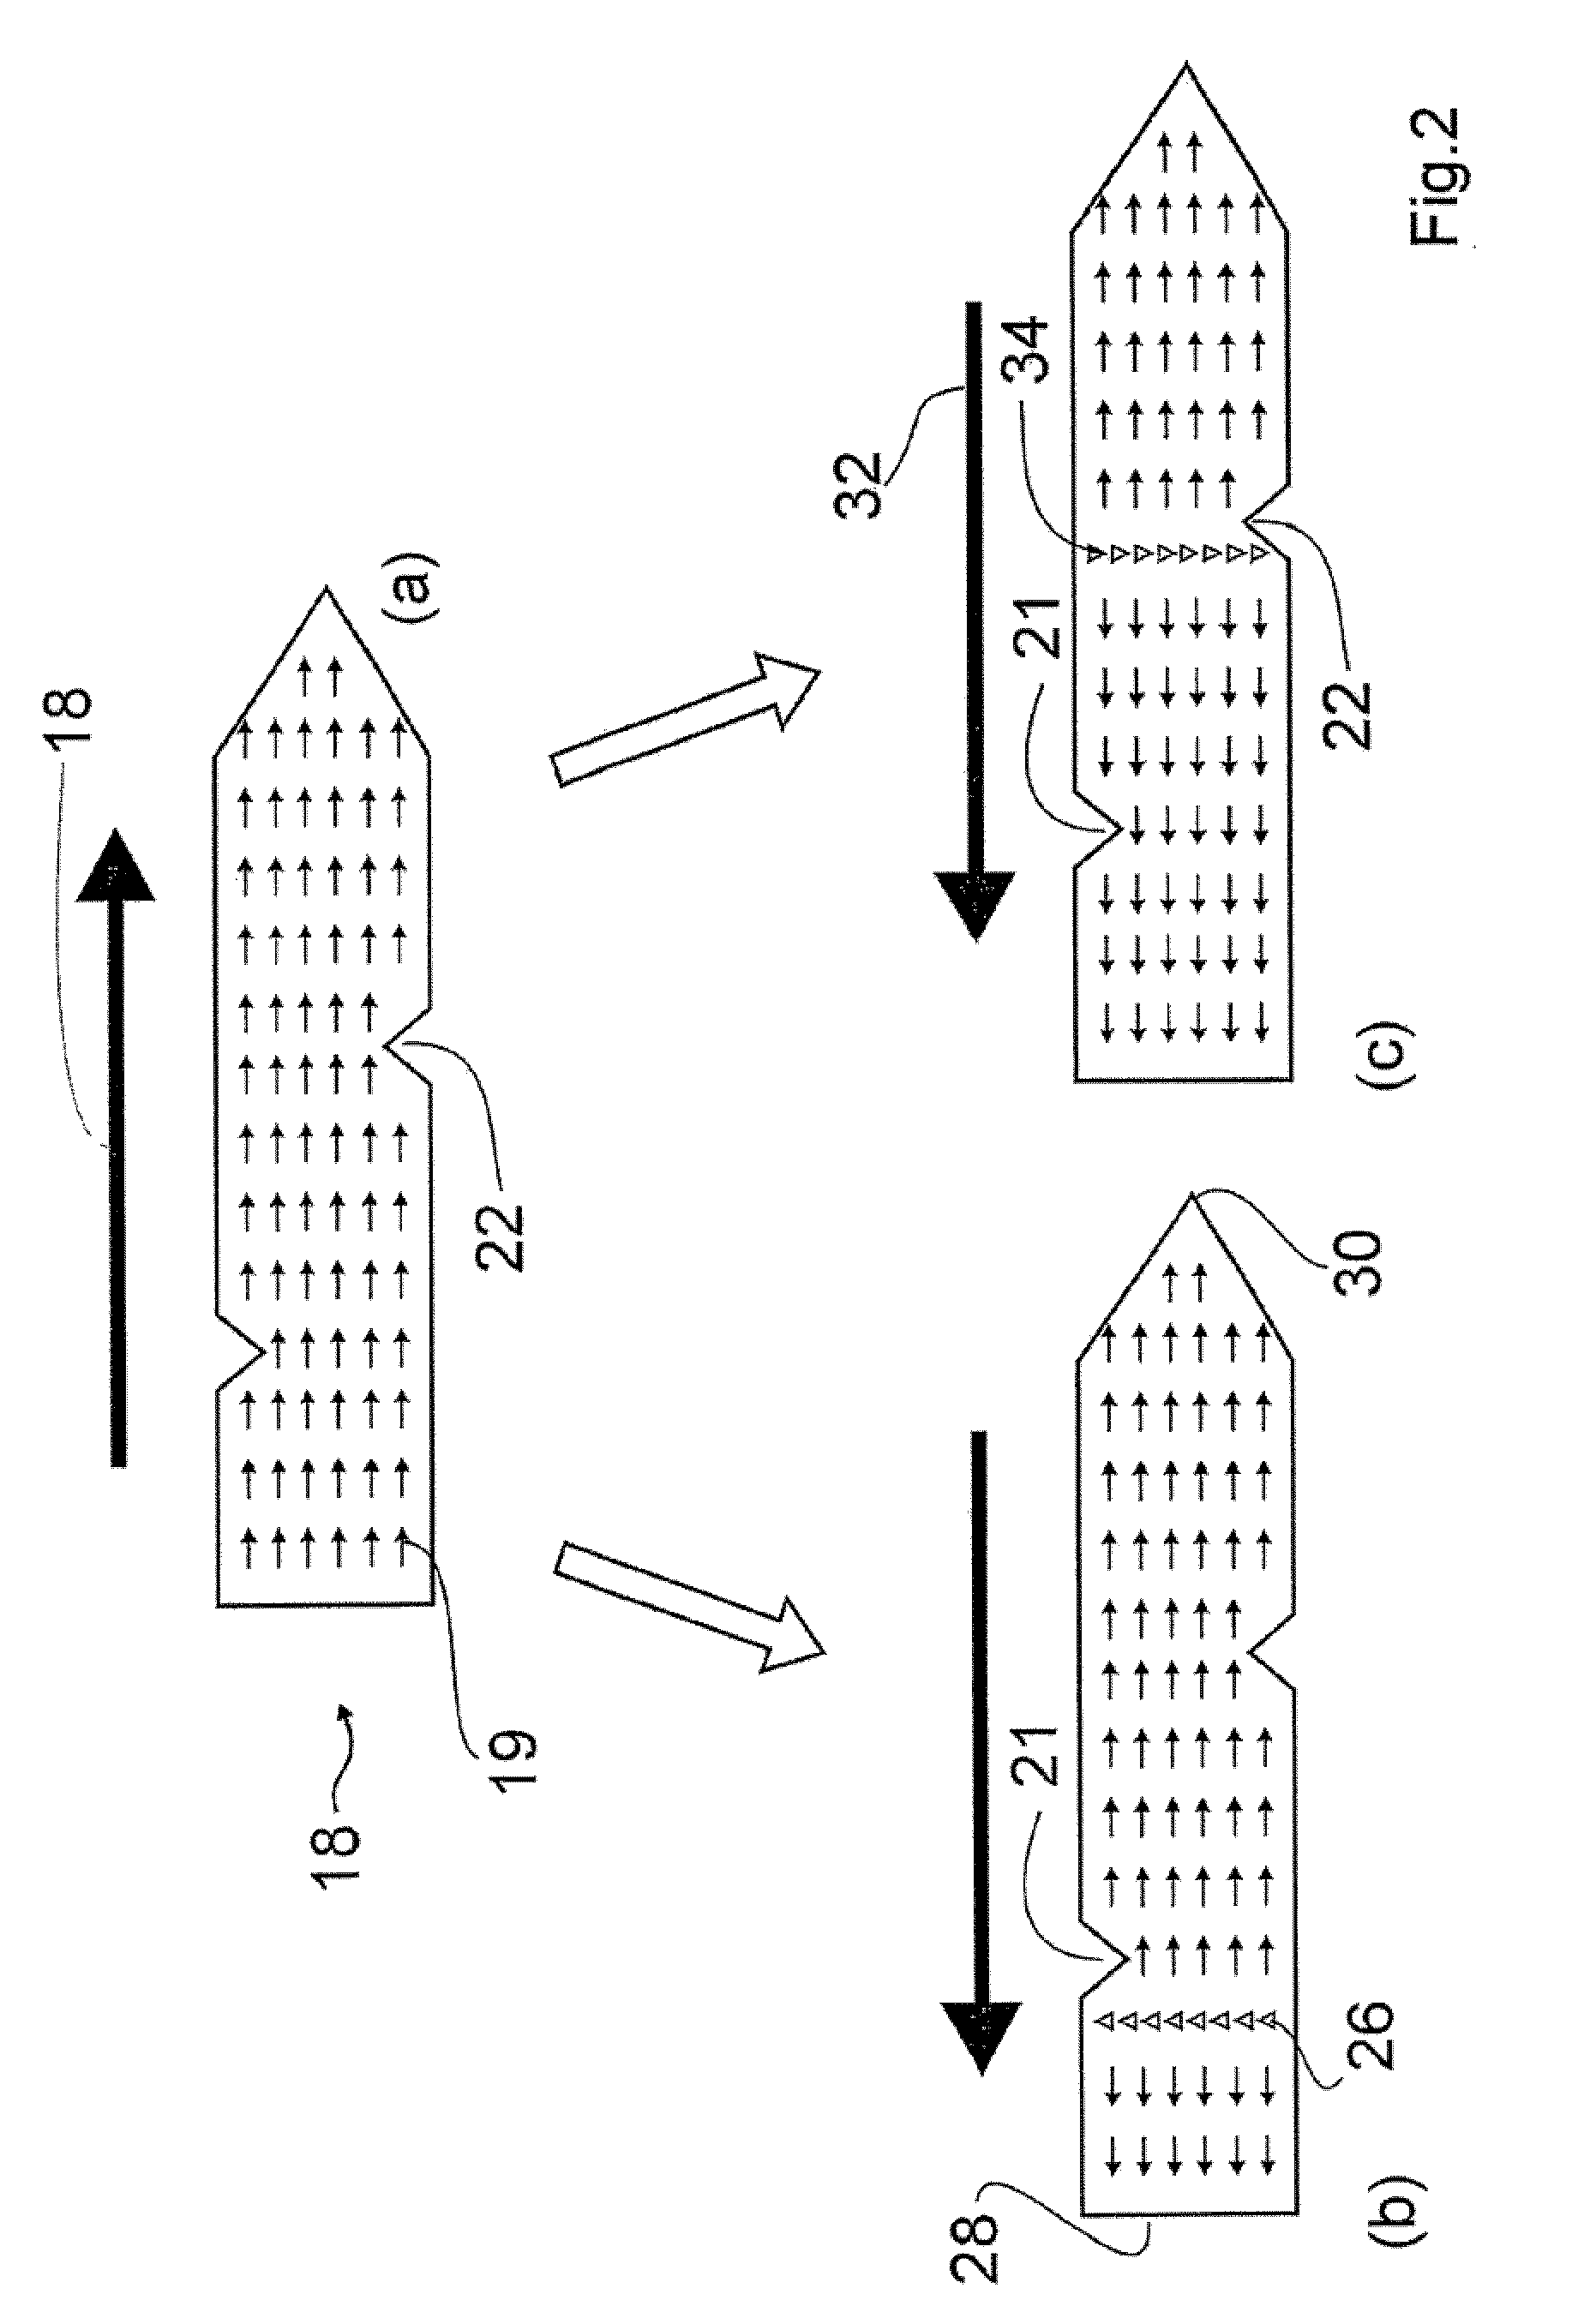 Magnetic structure with multiple-bit storage capabilities